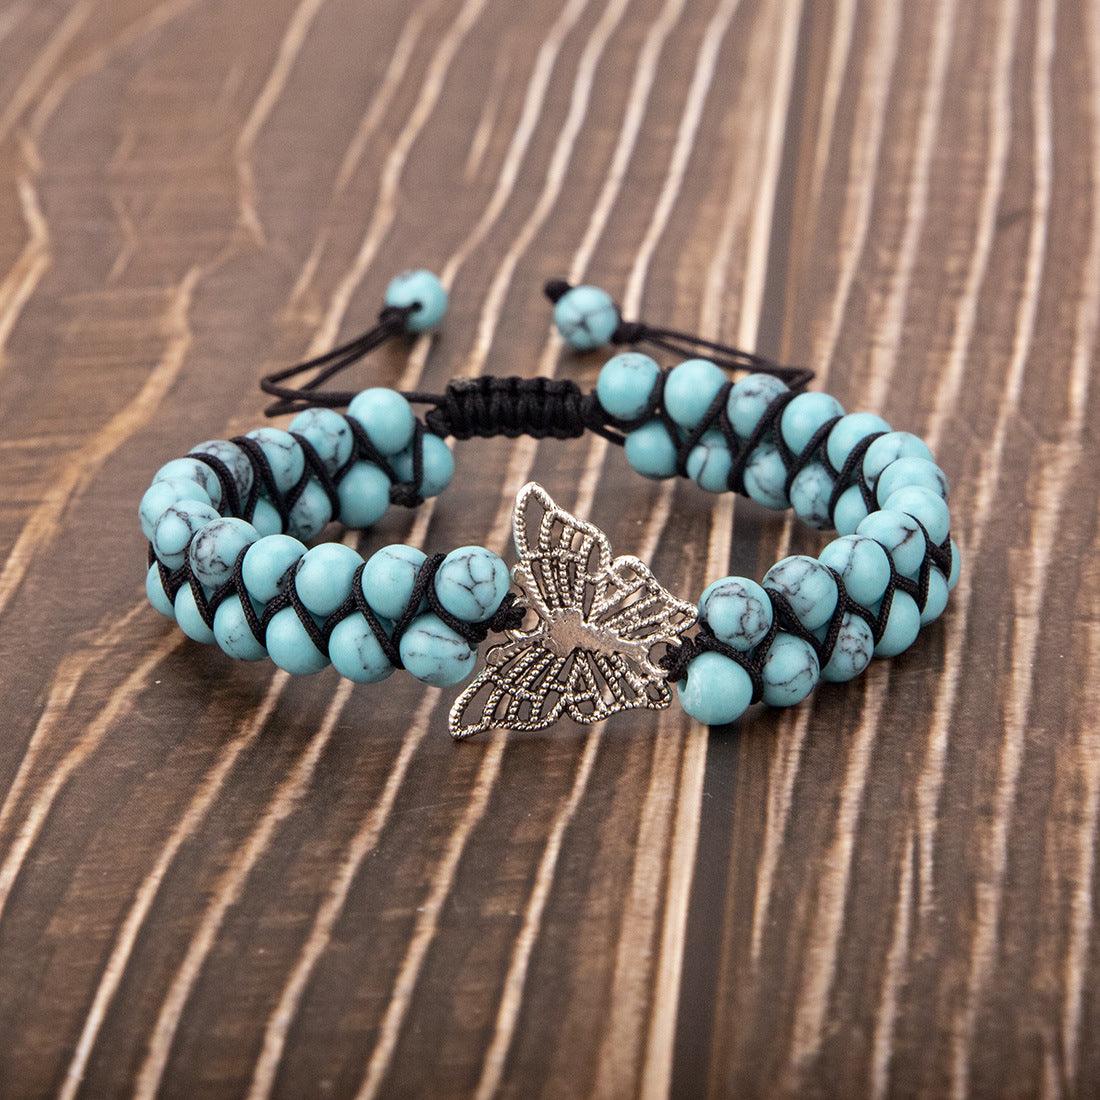 Tree of Life Double Row Bracelet: Natural Stone Beads for Grounding | Higher Frequencies - HigherFrequencies